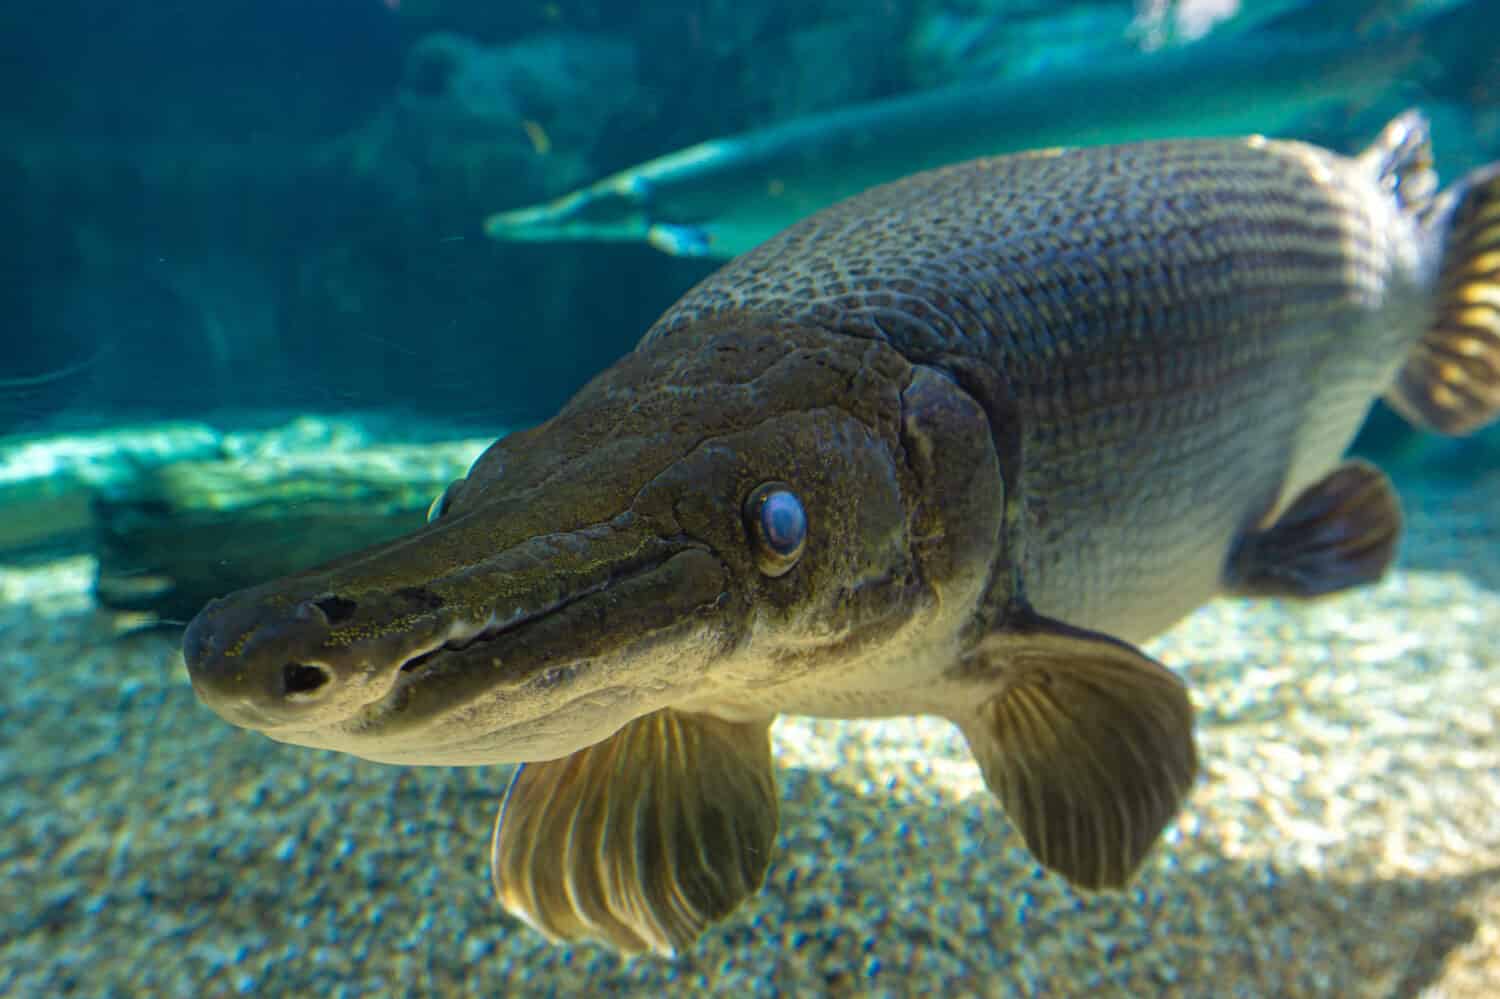 Alligator gar, a species of large fish native to North America.